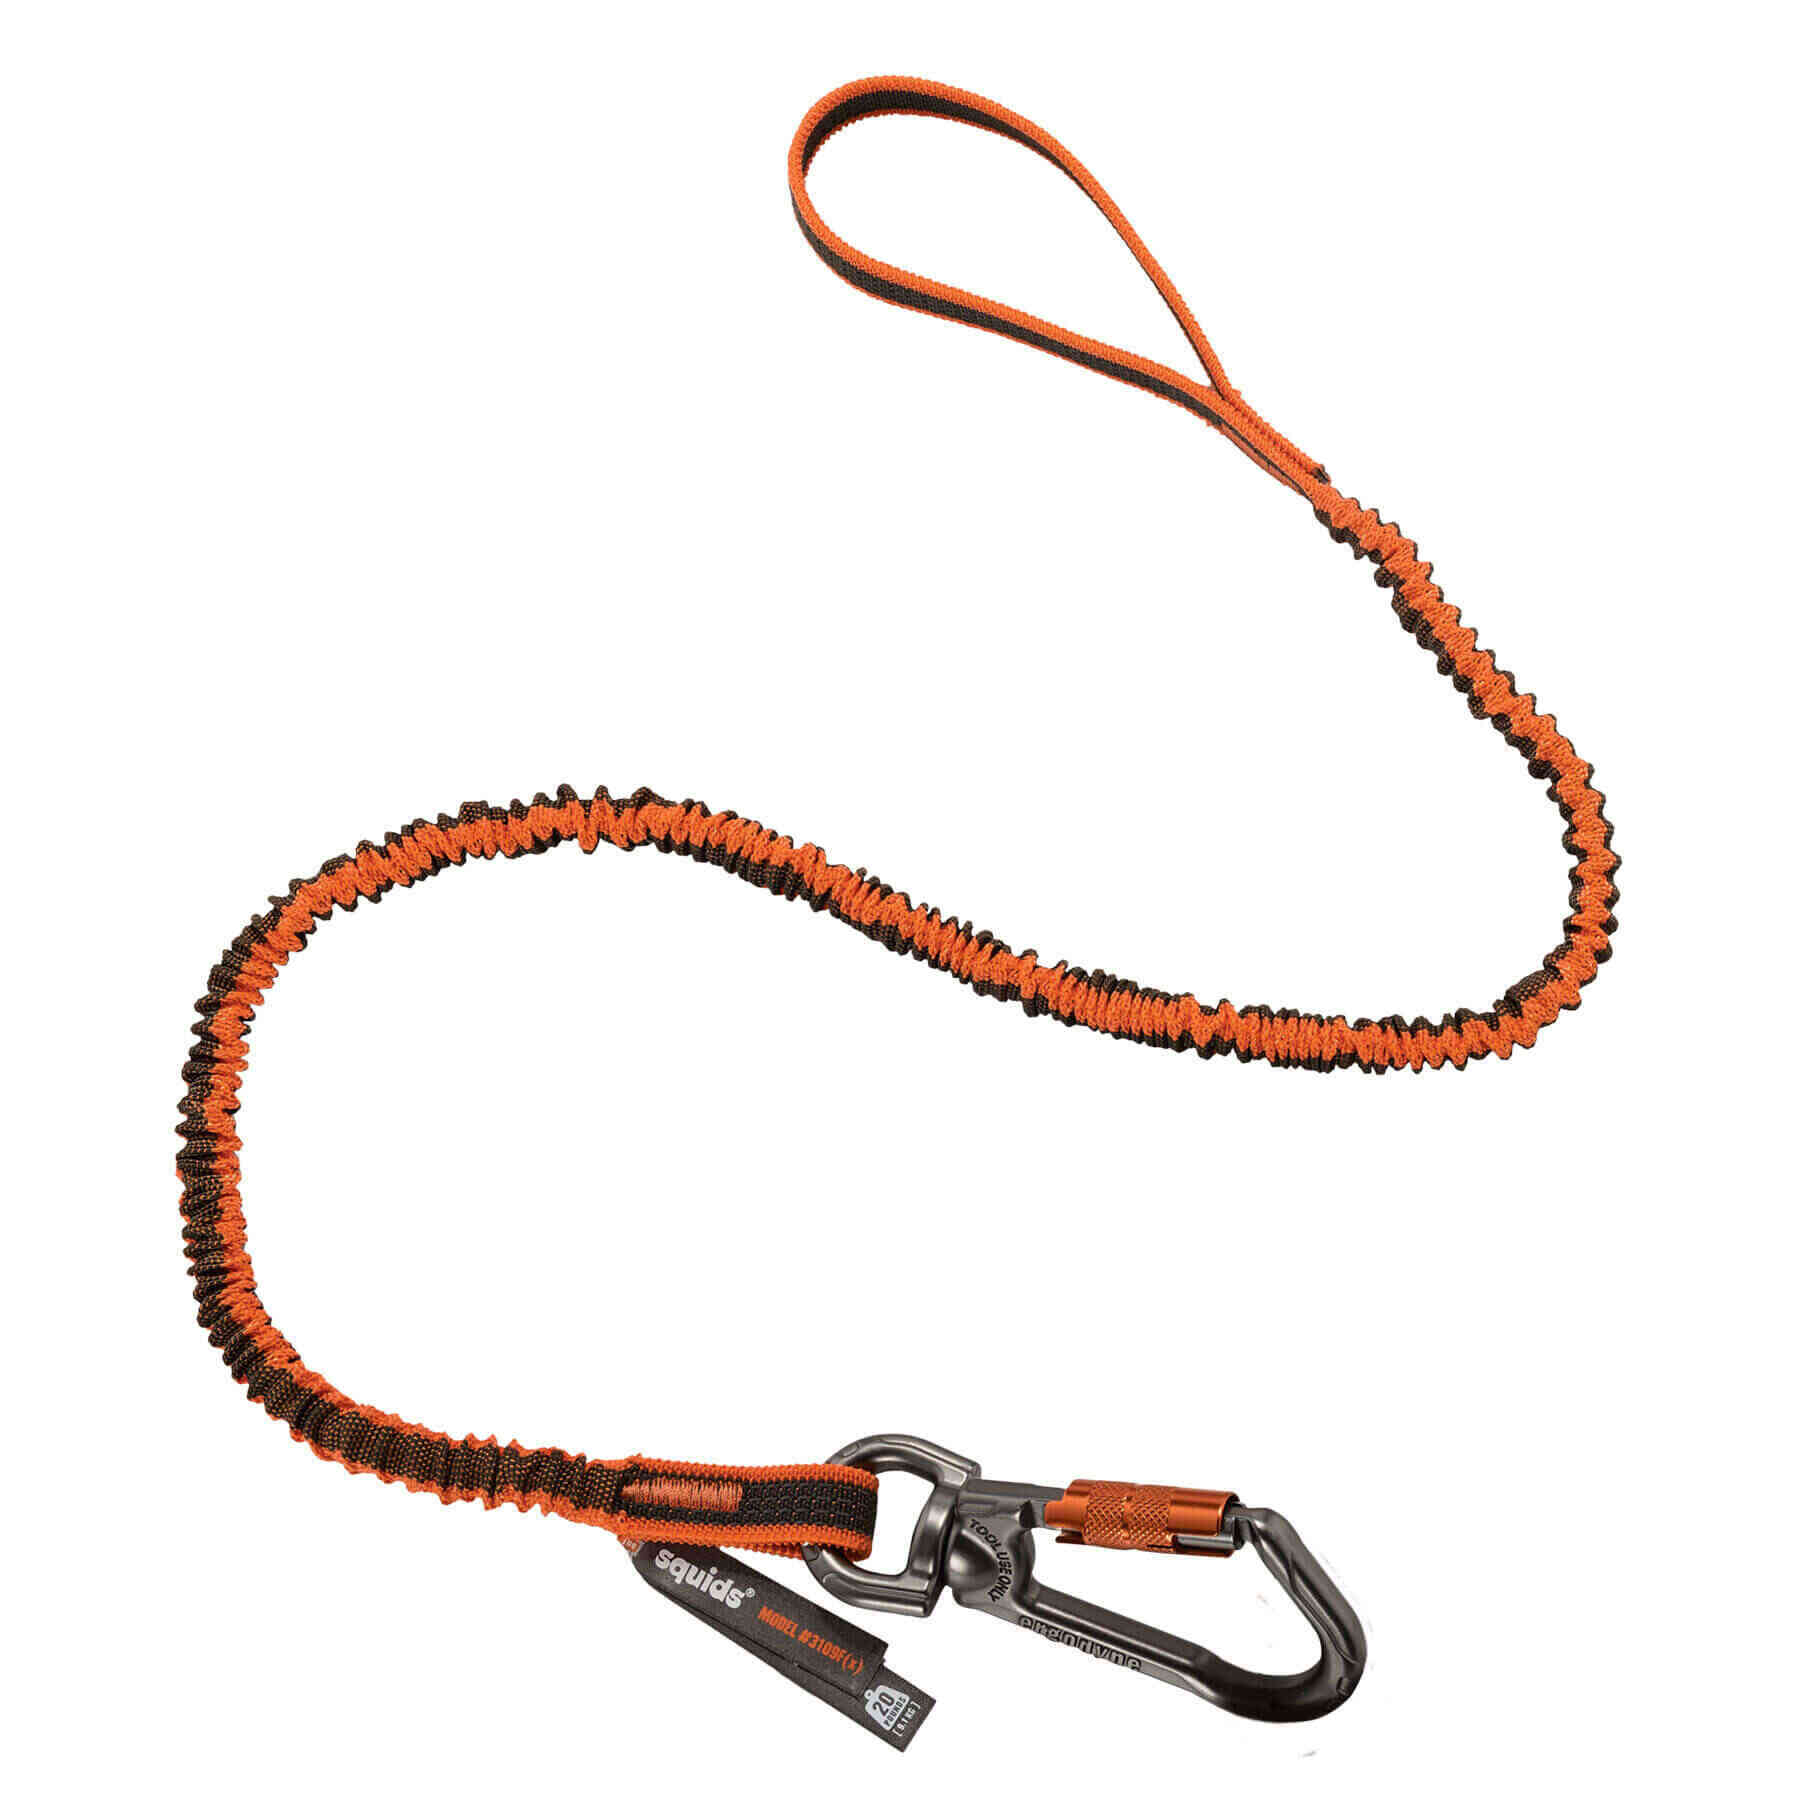 Tyny Tools Swivel Carabiner Clips SMALL Orange (Pack of 4)